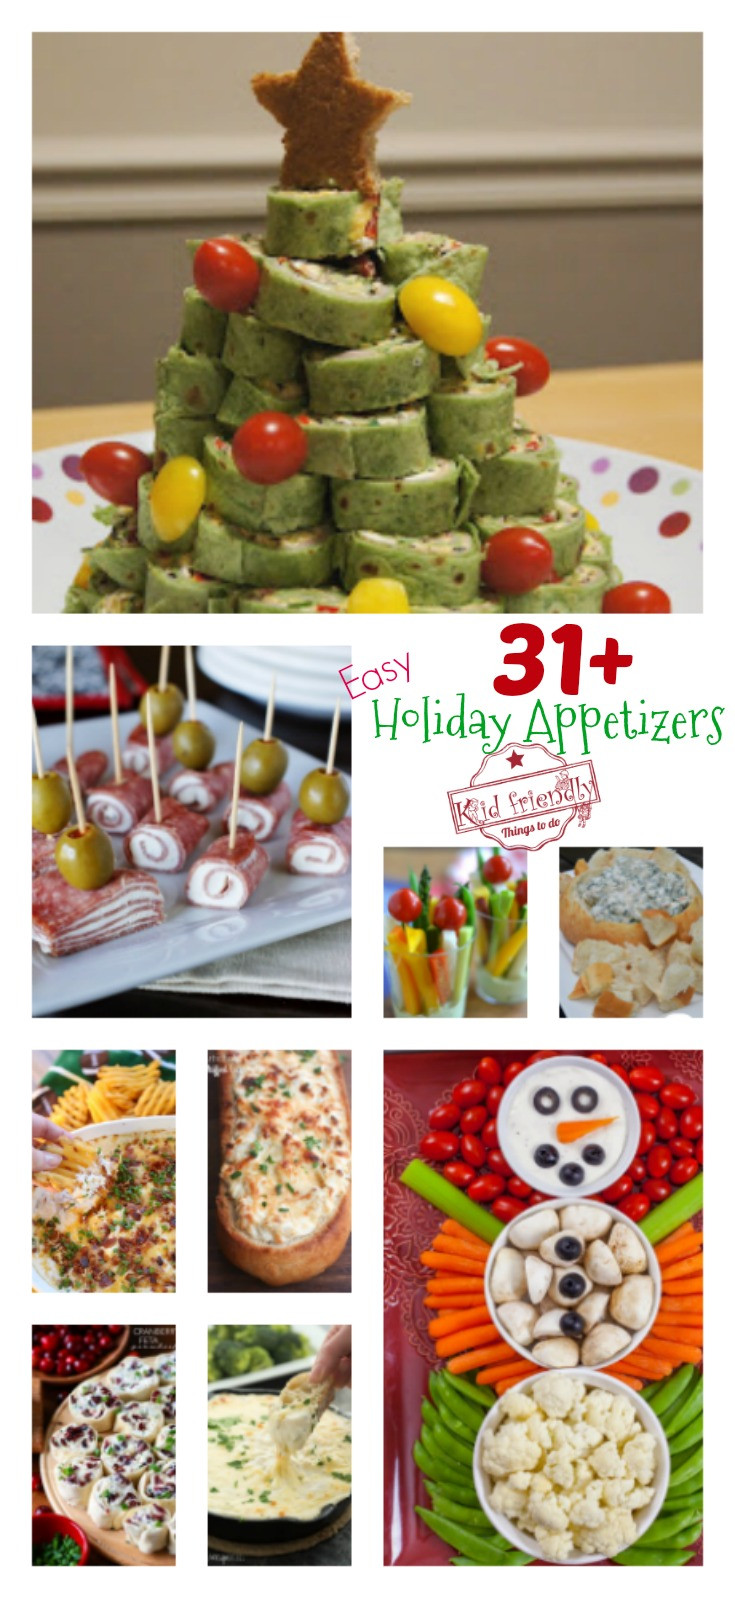 Christmas Appetizers Easy
 Over 31 Easy Holiday Appetizers to Make for Christmas New